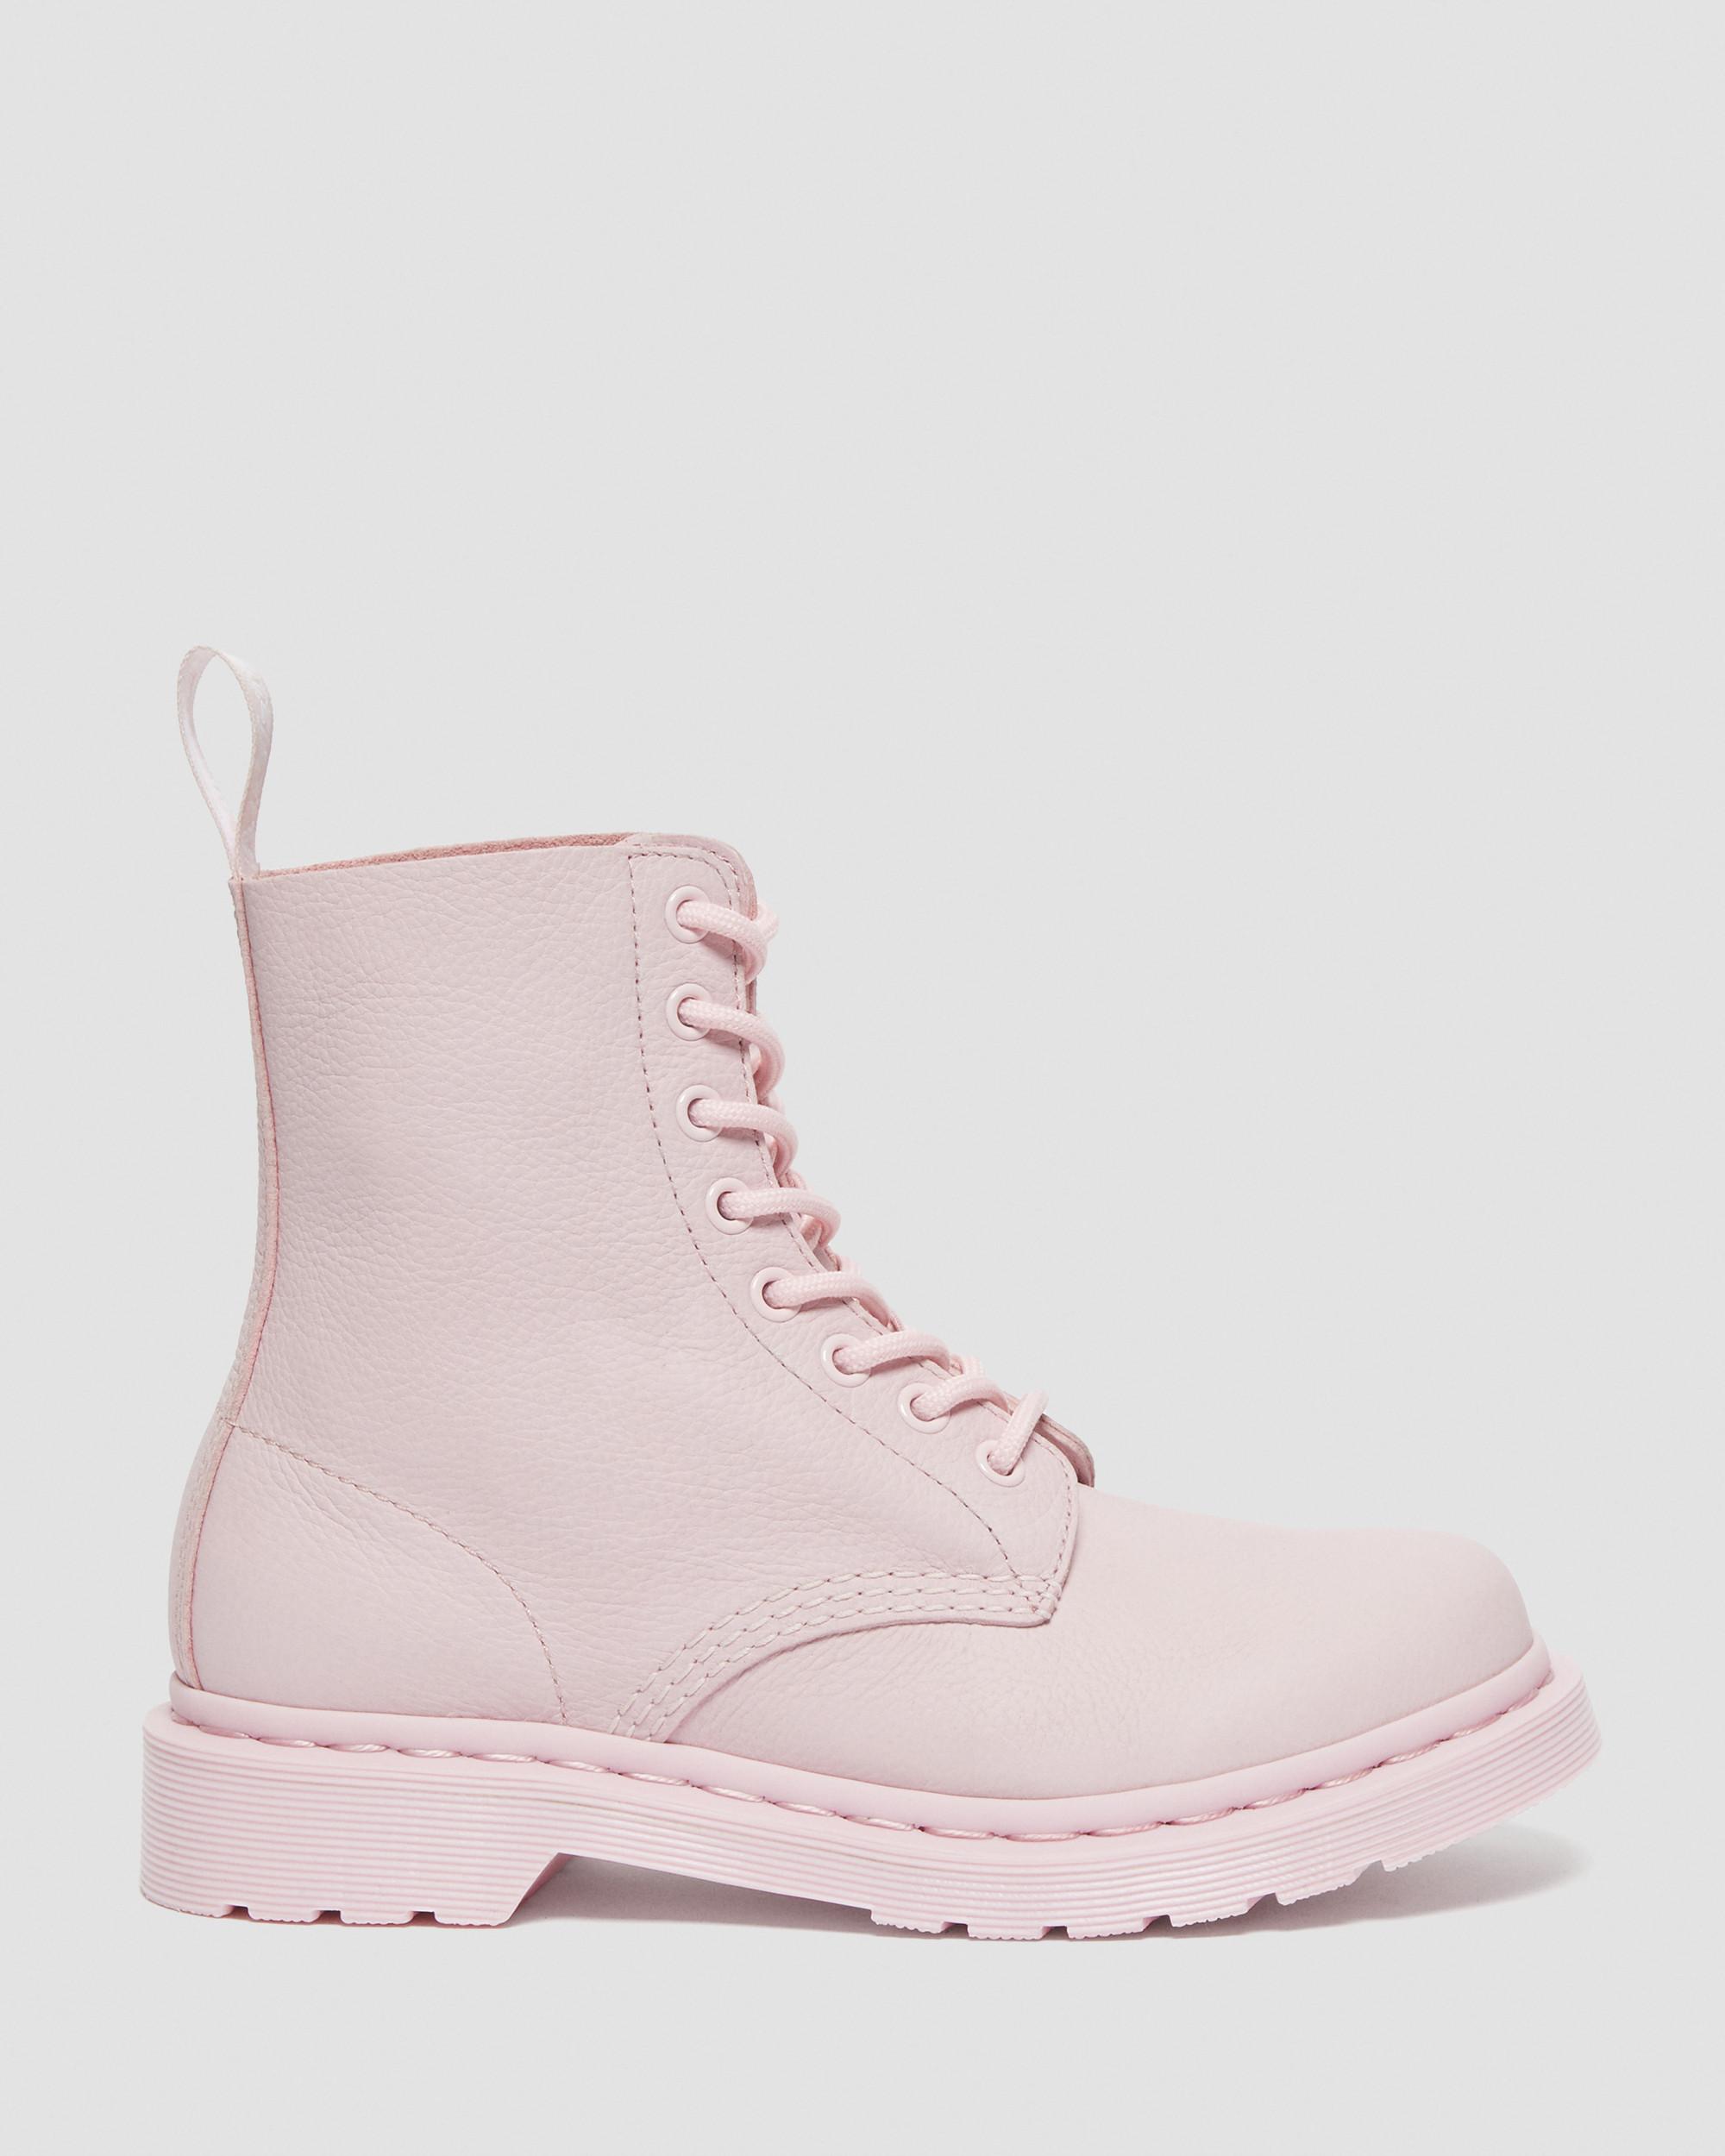 1460 Pascal Women's Mono Lace Up Boots in Pink